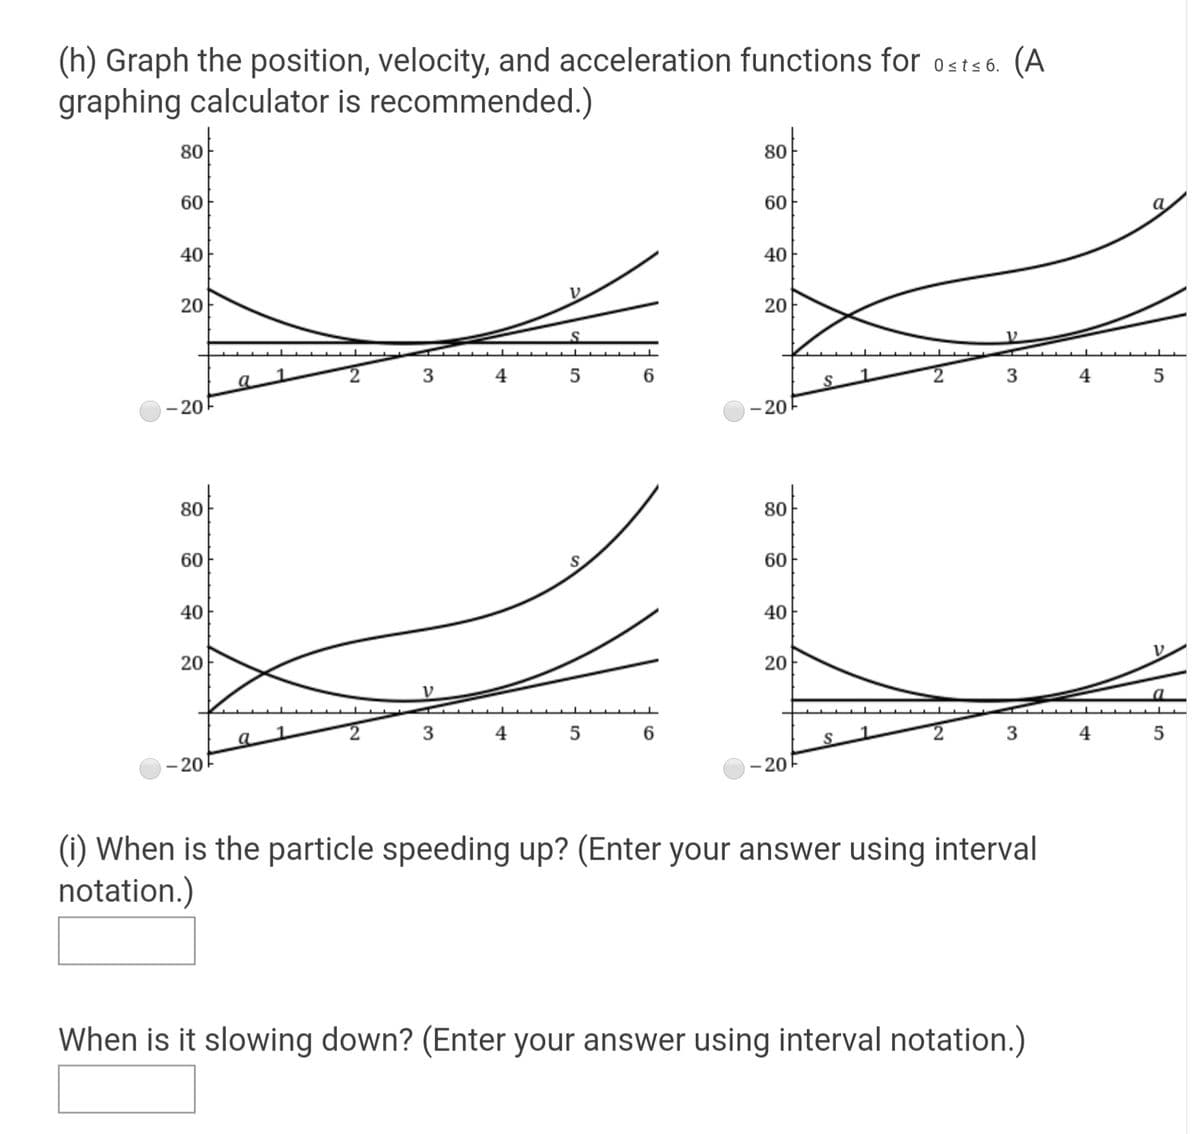 (h) Graph the position, velocity, and acceleration functions for 0sts 6. (A
graphing calculator is recommended.)
80
80
60
60
40
40
20
20
4
5
6.
3
4
- 20-
- 20F
80
80
60
S.
60
40
40
20
4
6.
S
- 20F
- 20
(i) When is the particle speeding up? (Enter your answer using interval
notation.)
When is it slowing down? (Enter your answer using interval notation.)
20
